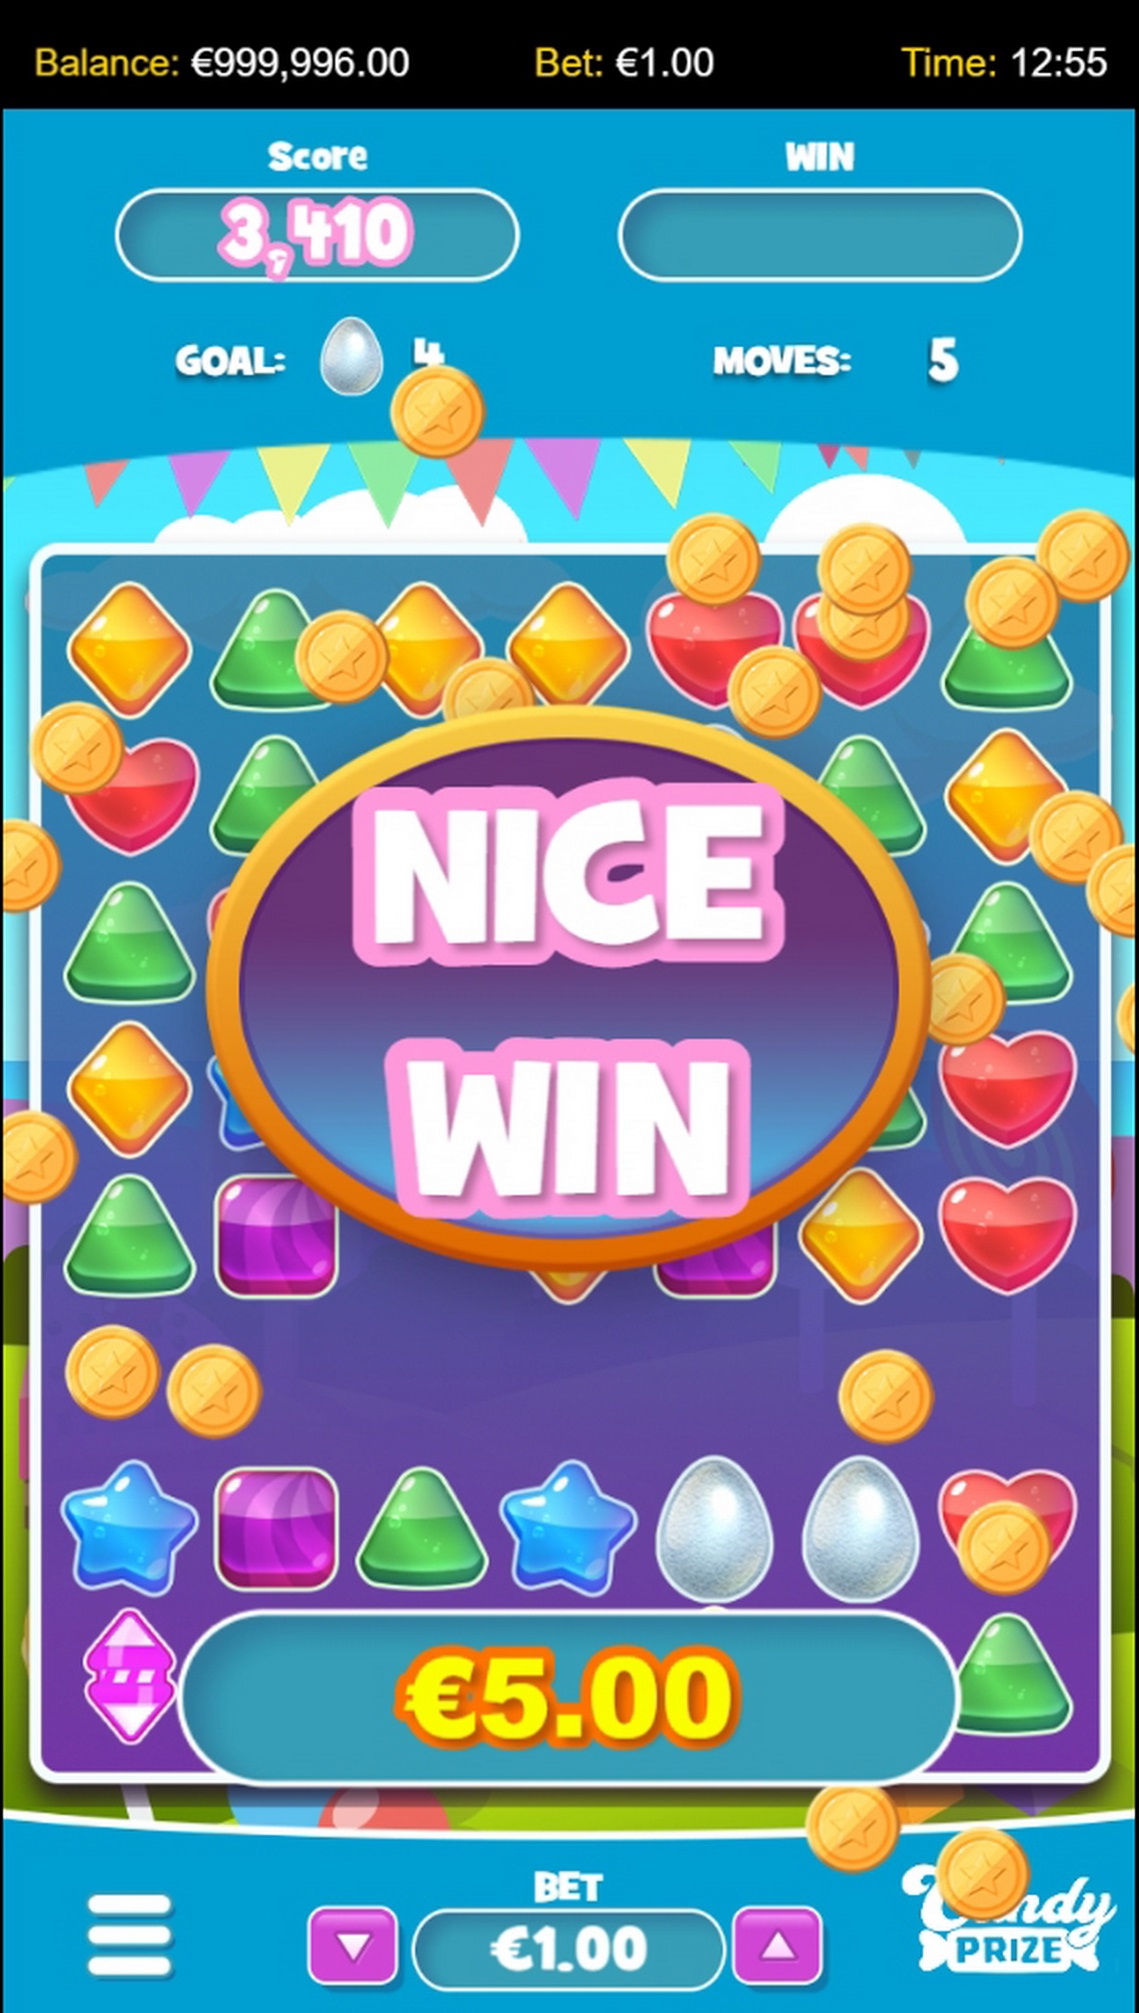 Win Money in Candy Prize BIG Free Slot Game by Green Jade Games